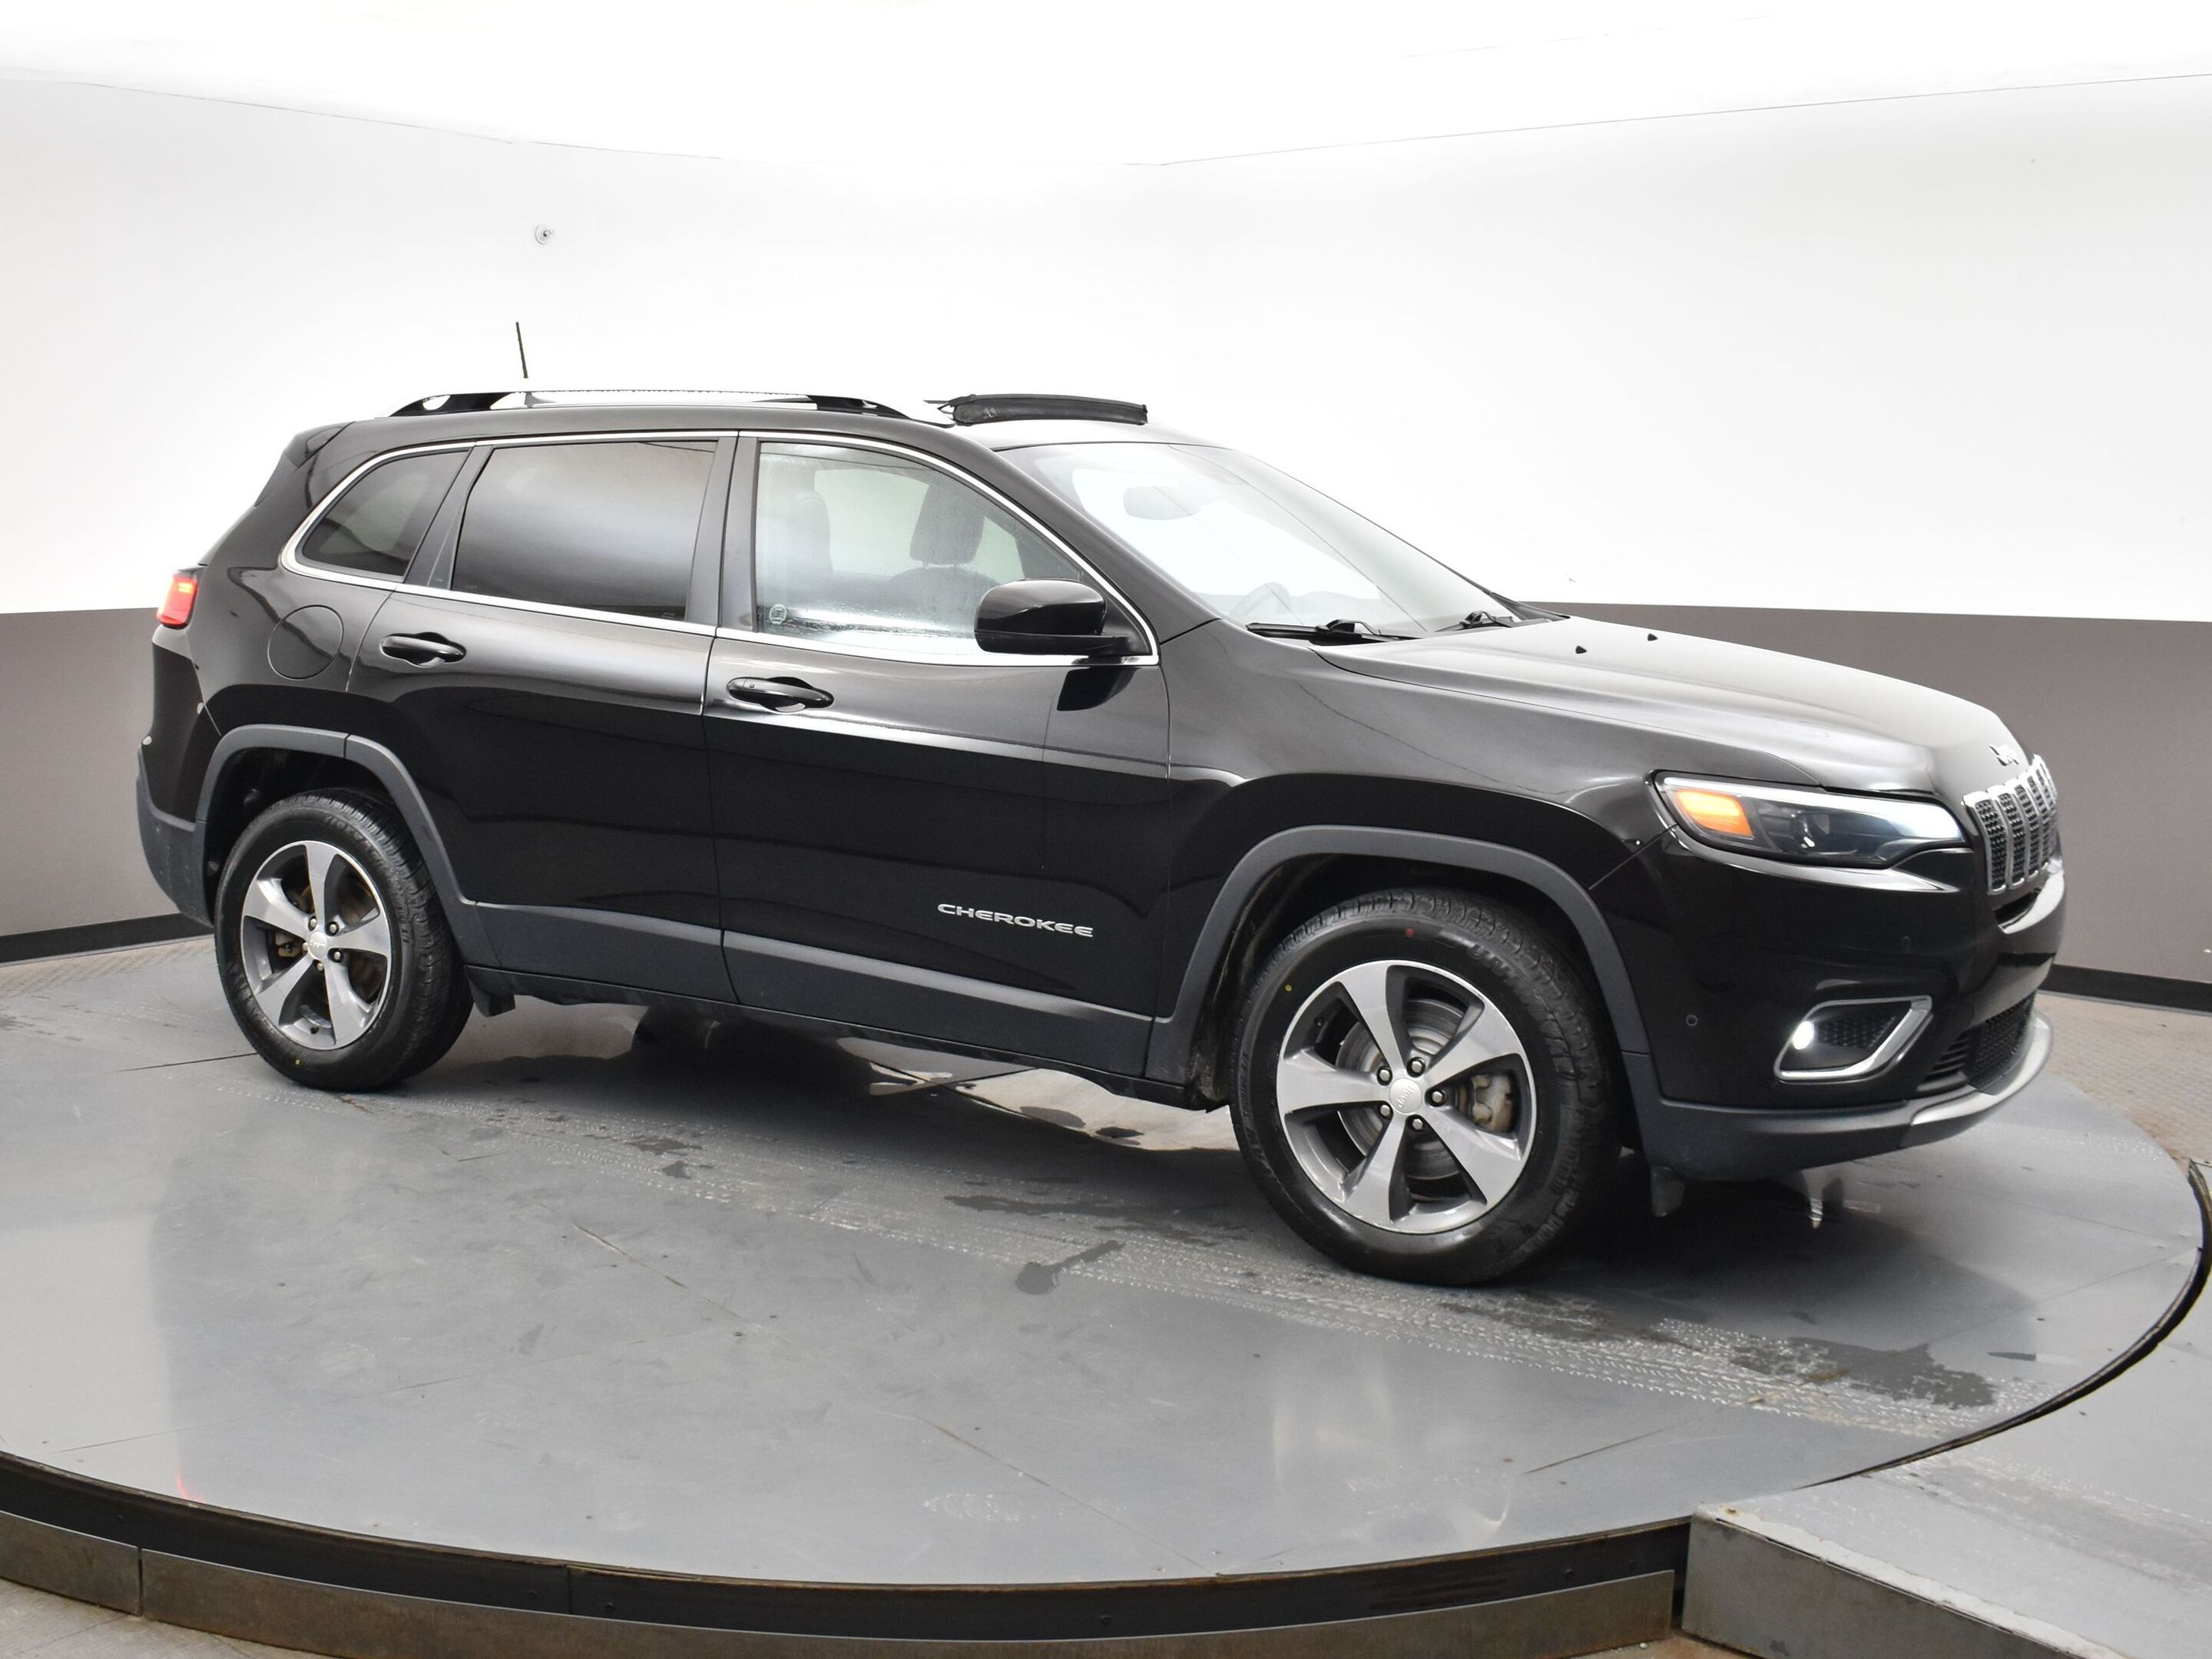 2019 Jeep Cherokee LIMITED 4X4 PANORAMIC ROOF, LEATHER INTERIOR